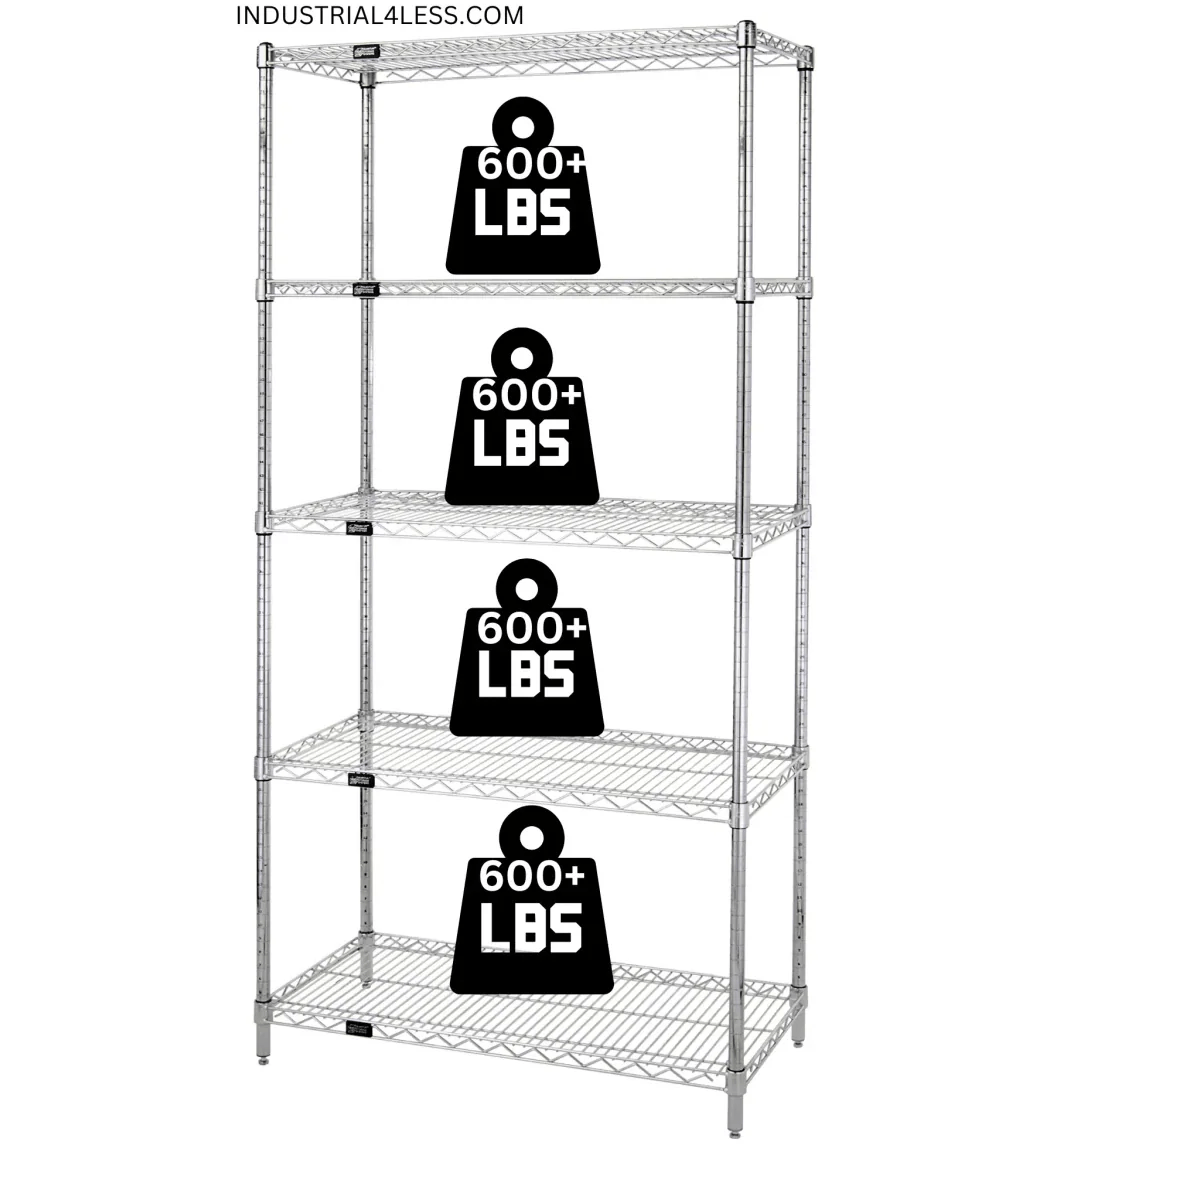 36" x 72" Stainless Steel Wire Shelving Unit - Industrial 4 Less - 36725S-5